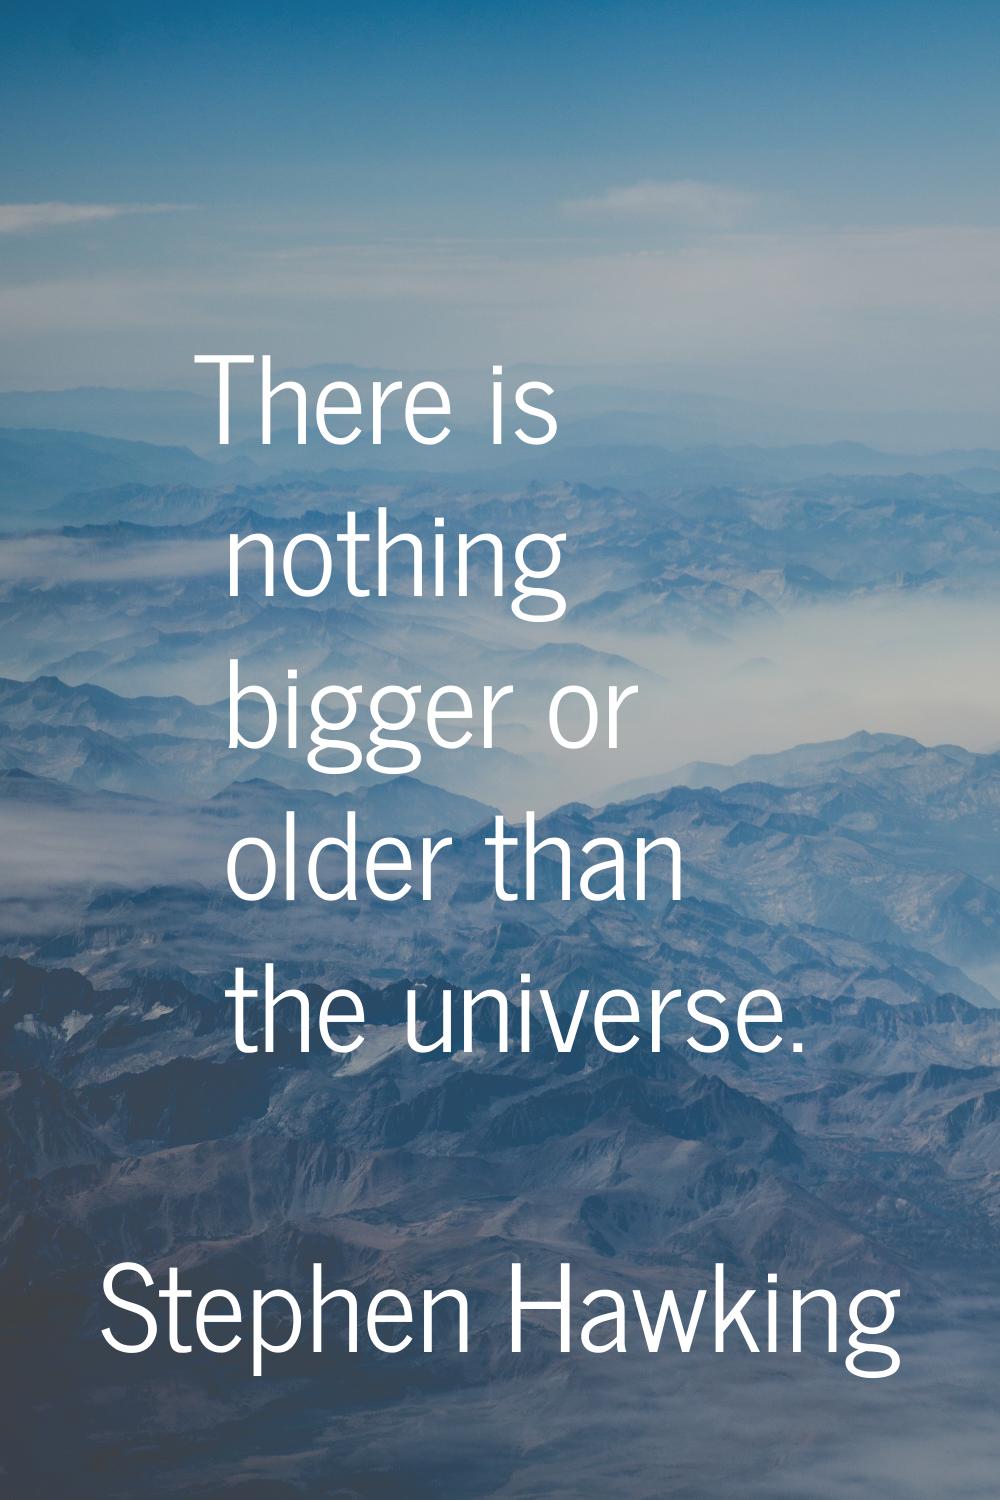 There is nothing bigger or older than the universe.